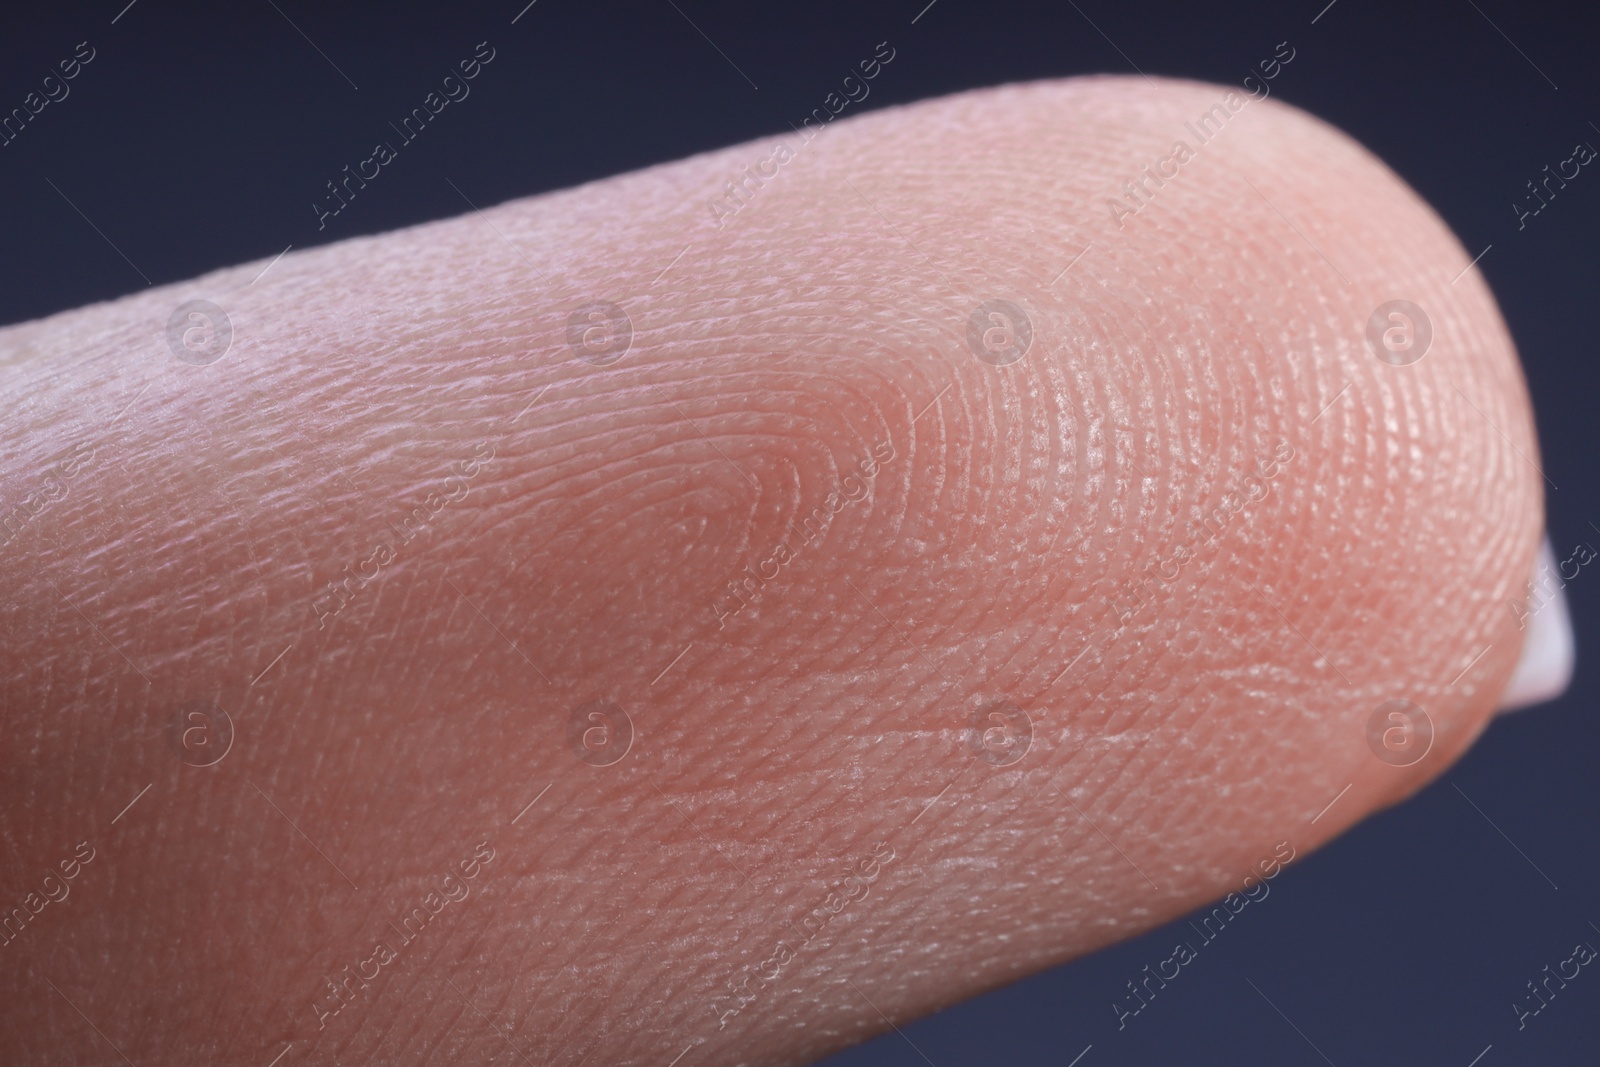 Photo of Finger with friction ridges on dark background, macro view